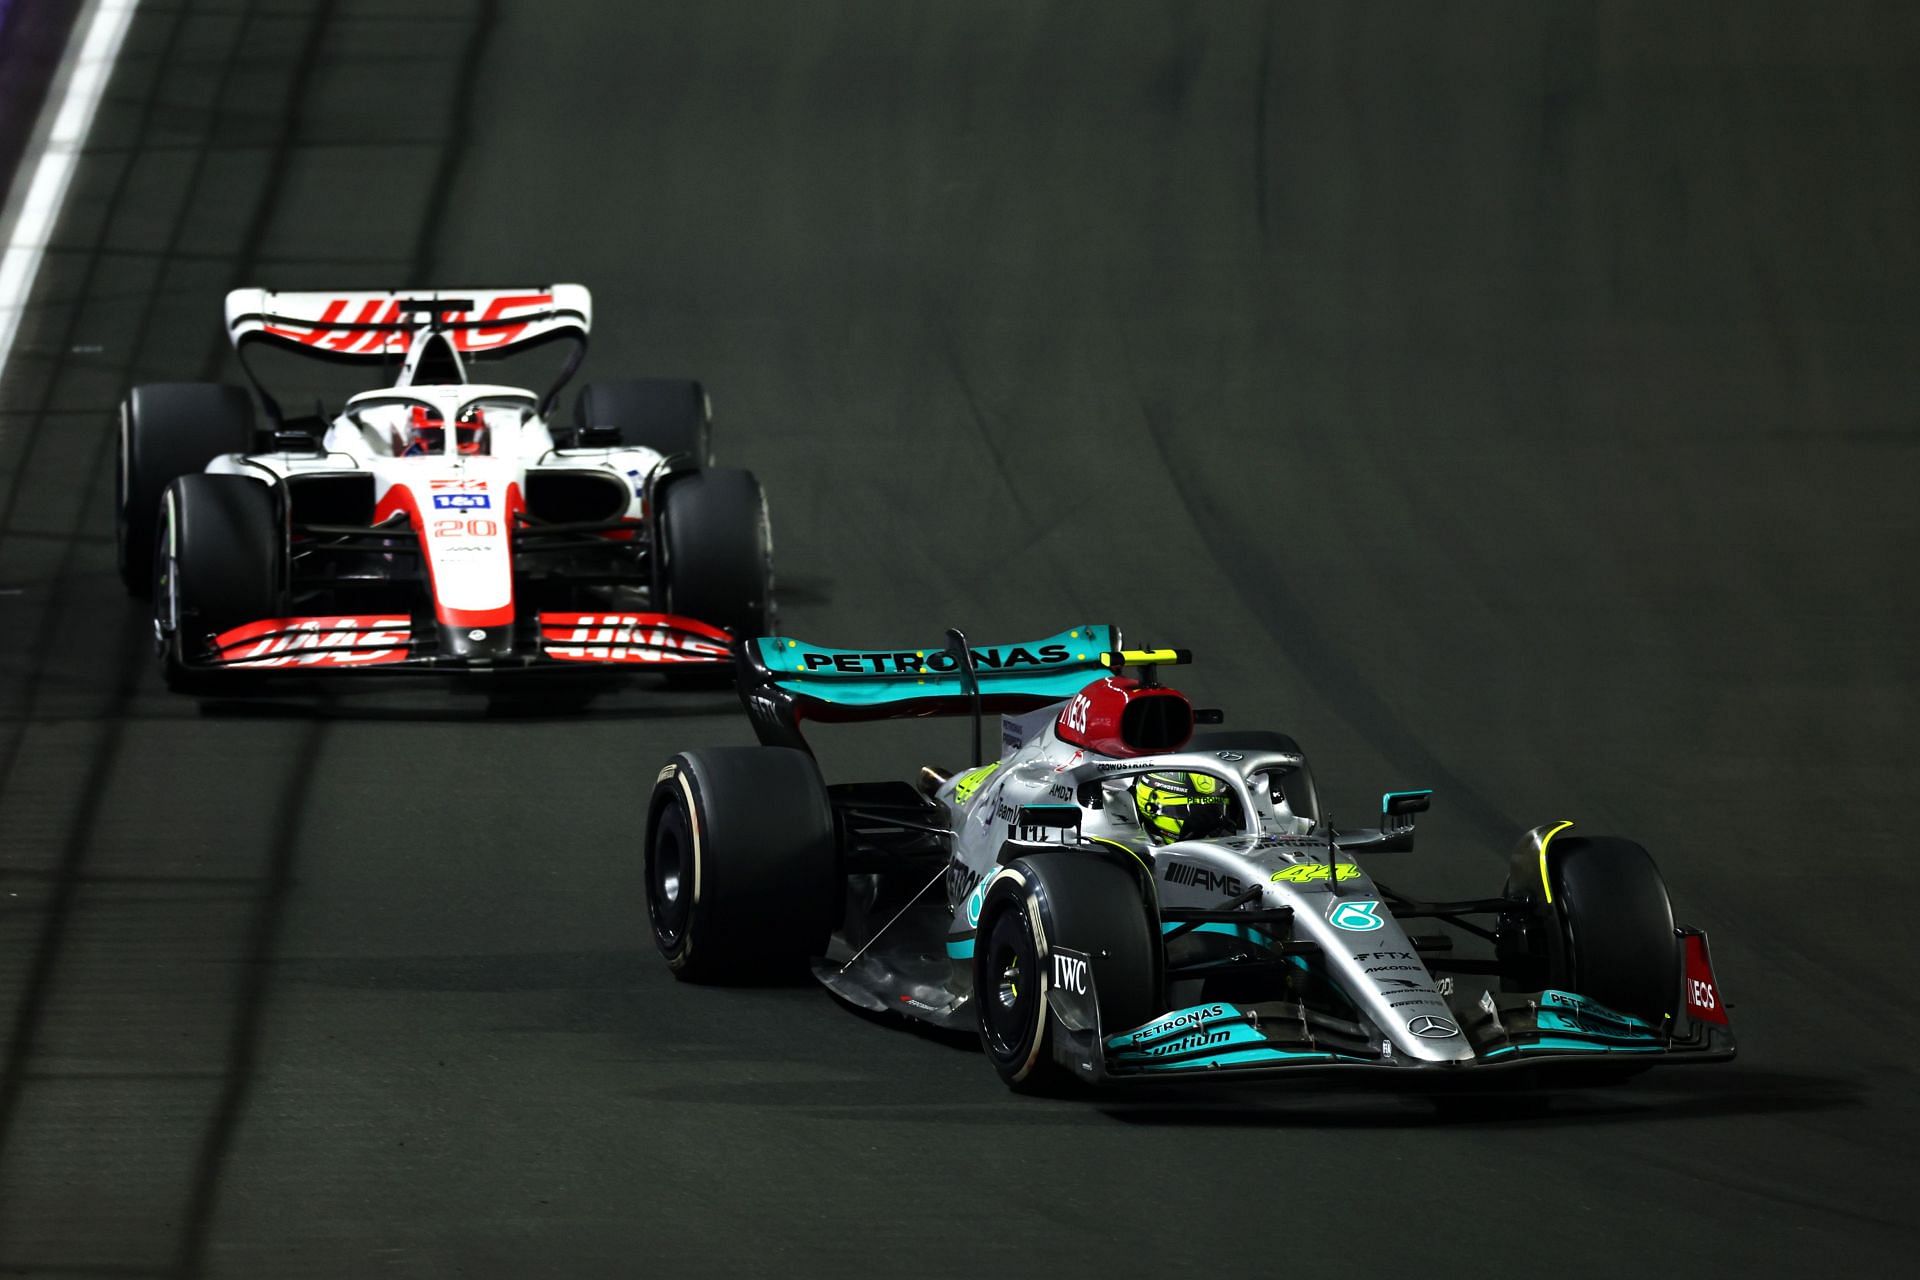 Mercedes&#039; Lewis Hamilton (foreground) being followed by Haas F1&#039;s Kevin Magnussen around the Jeddah Corniche Circuit (Photo by Lars Baron/Getty Images)